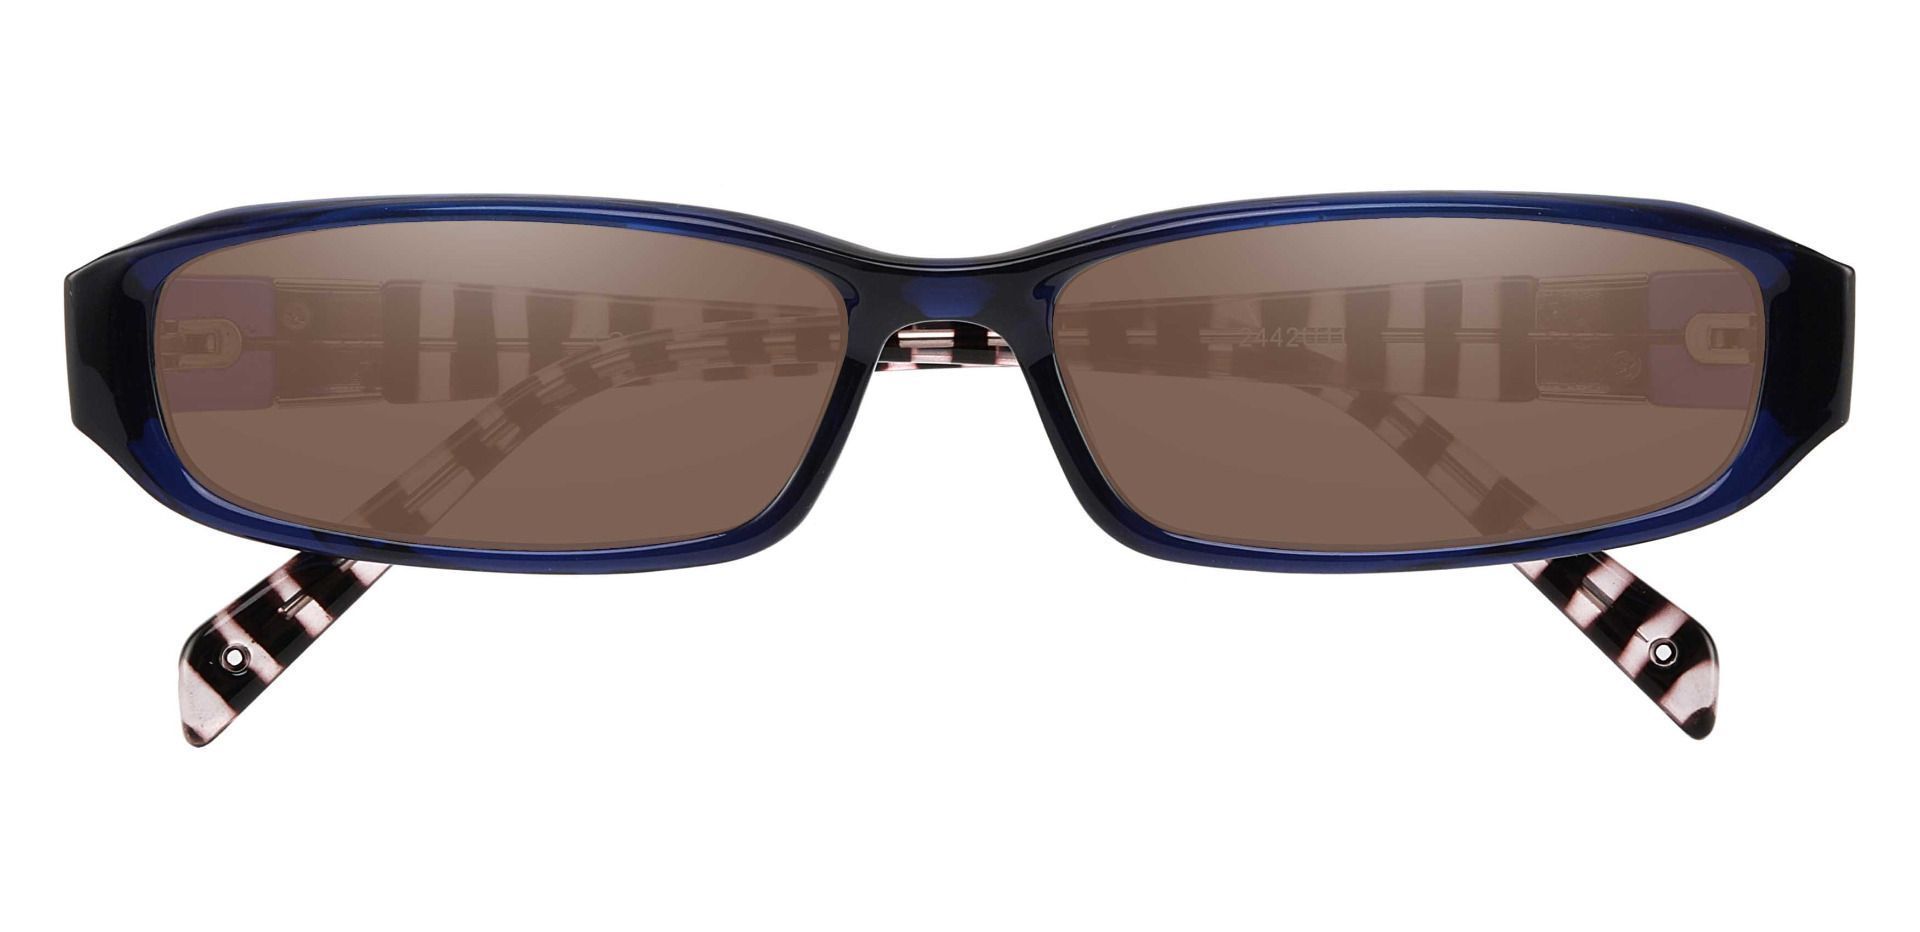 Mulberry Rectangle Single Vision Sunglasses - Blue Frame With Brown Lenses